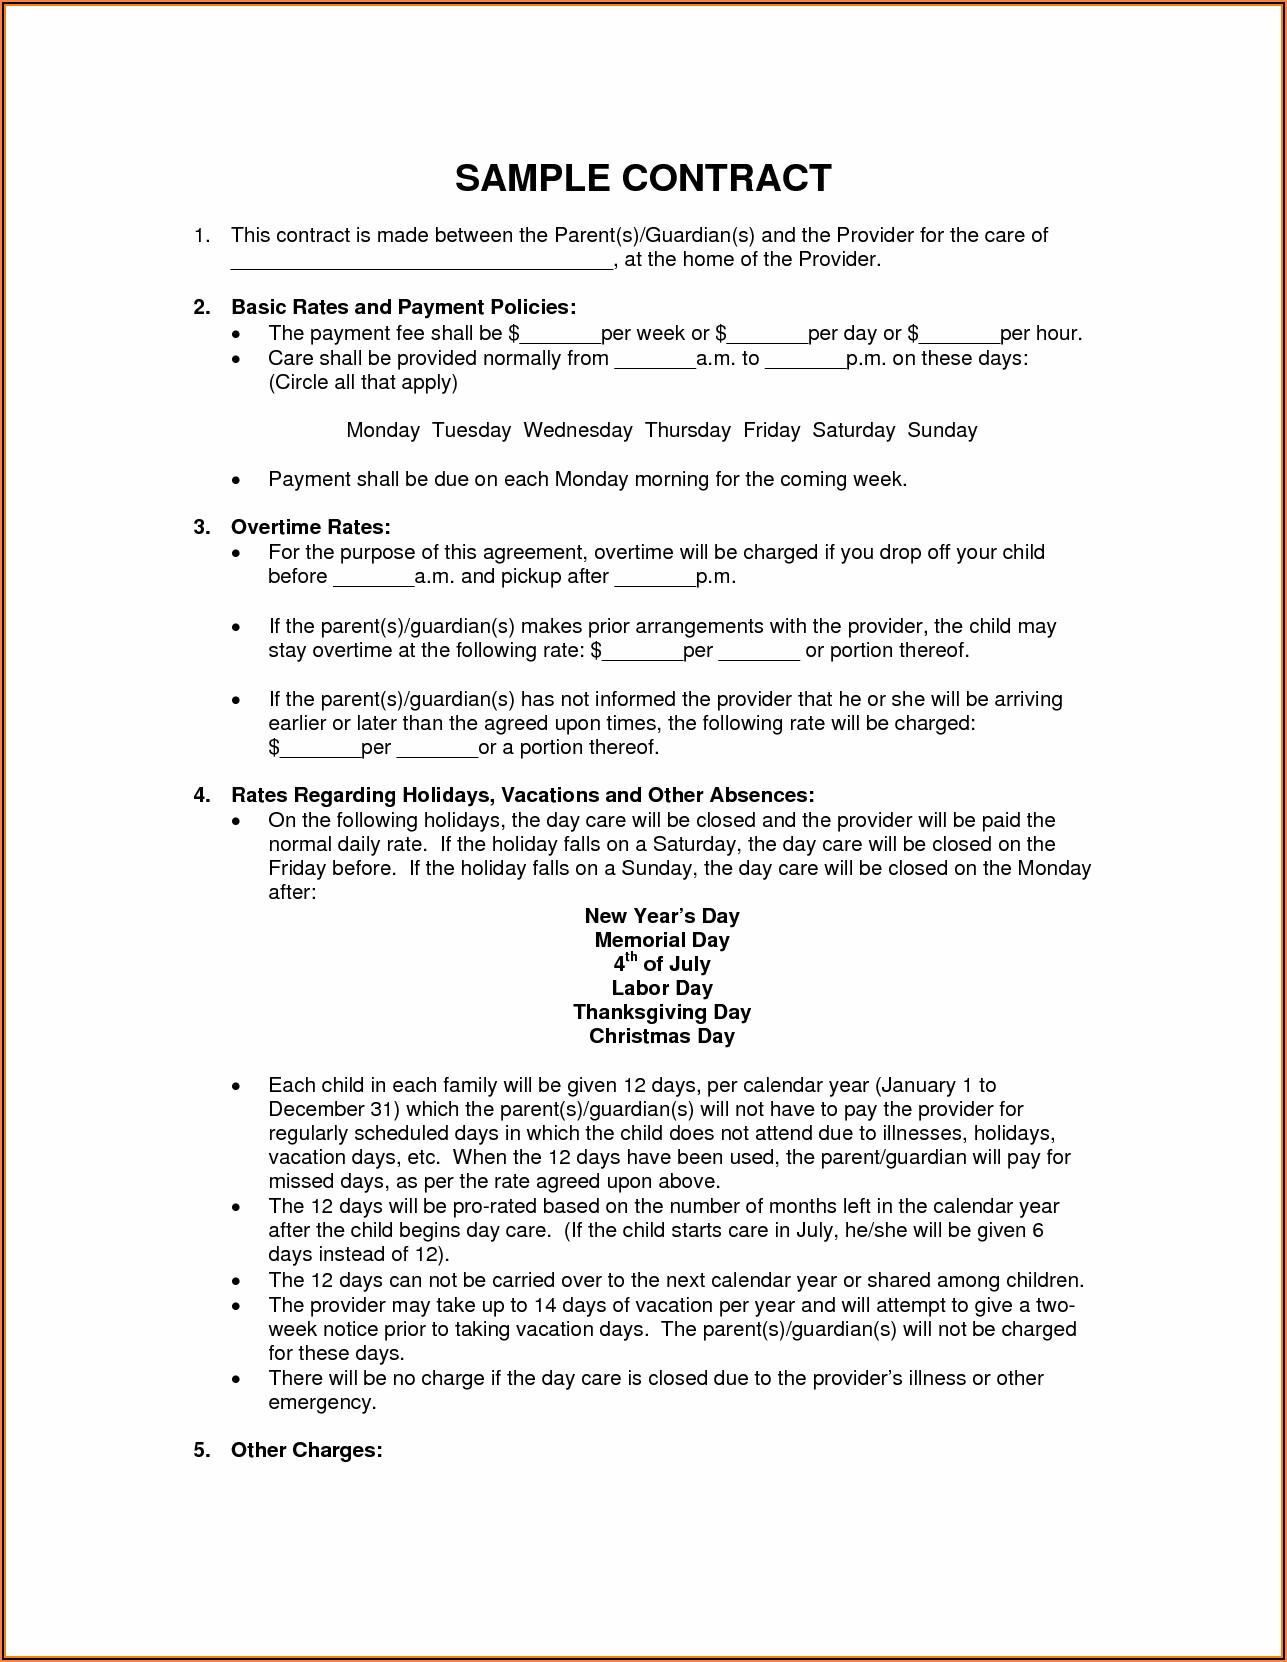 Child Care Contract Format